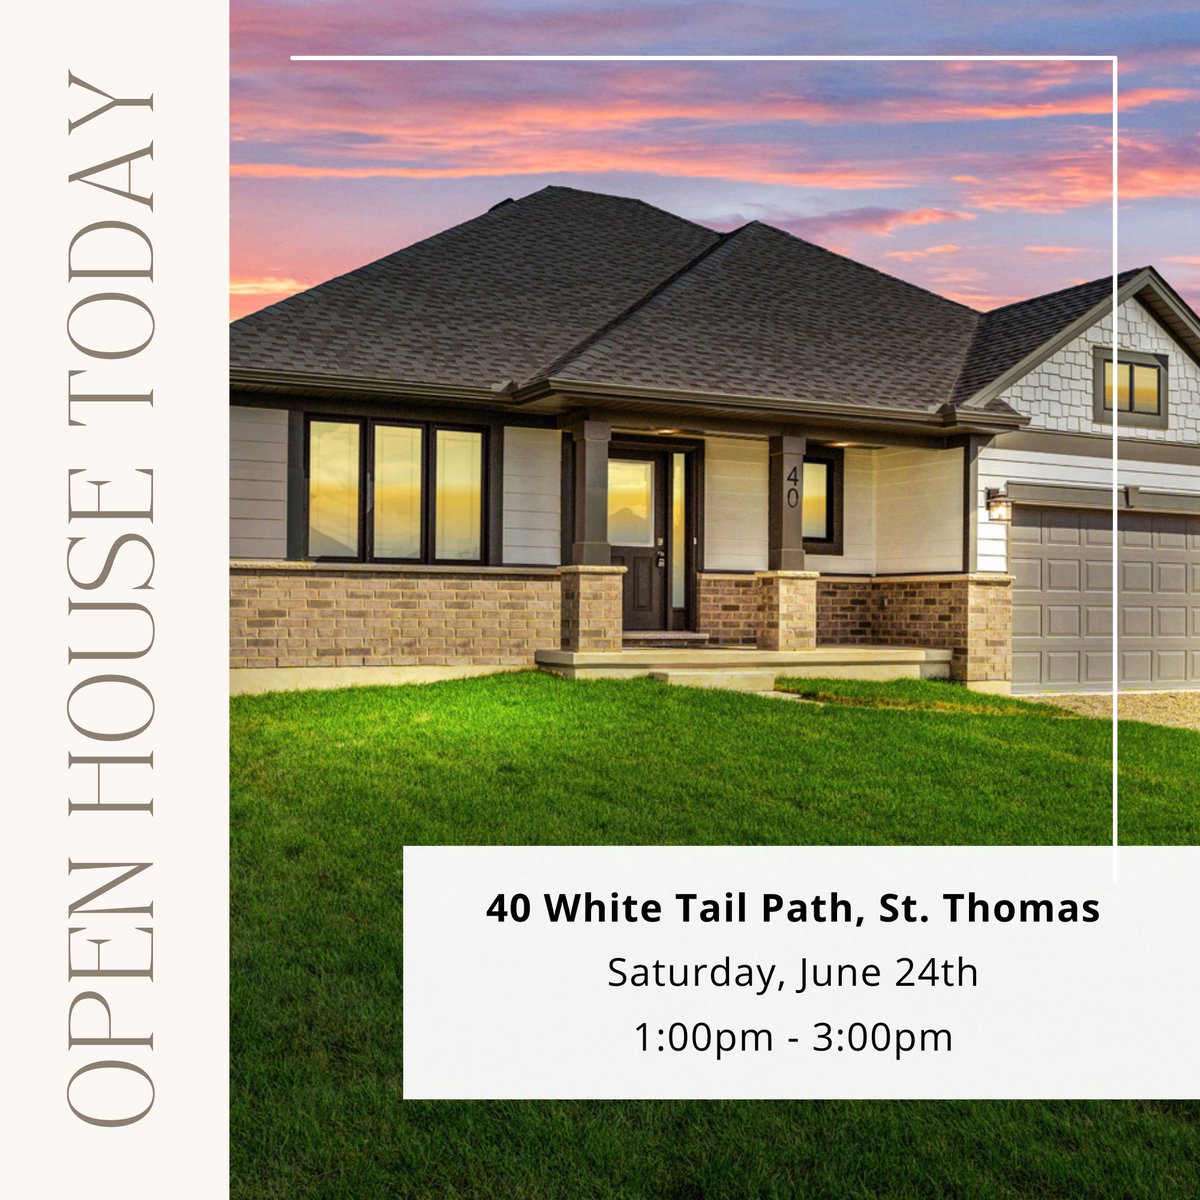 Join us for an exciting Open House event today at three stunning locations: 68 Hickory Lane, 40 White Tail Path, and 42 White Tail Path in St. Thomas. 

#openhouses  #openhouse  #comesayhi  #availablenow  #quickpossession  #quickpossessionhomes  #dougtarryhomes